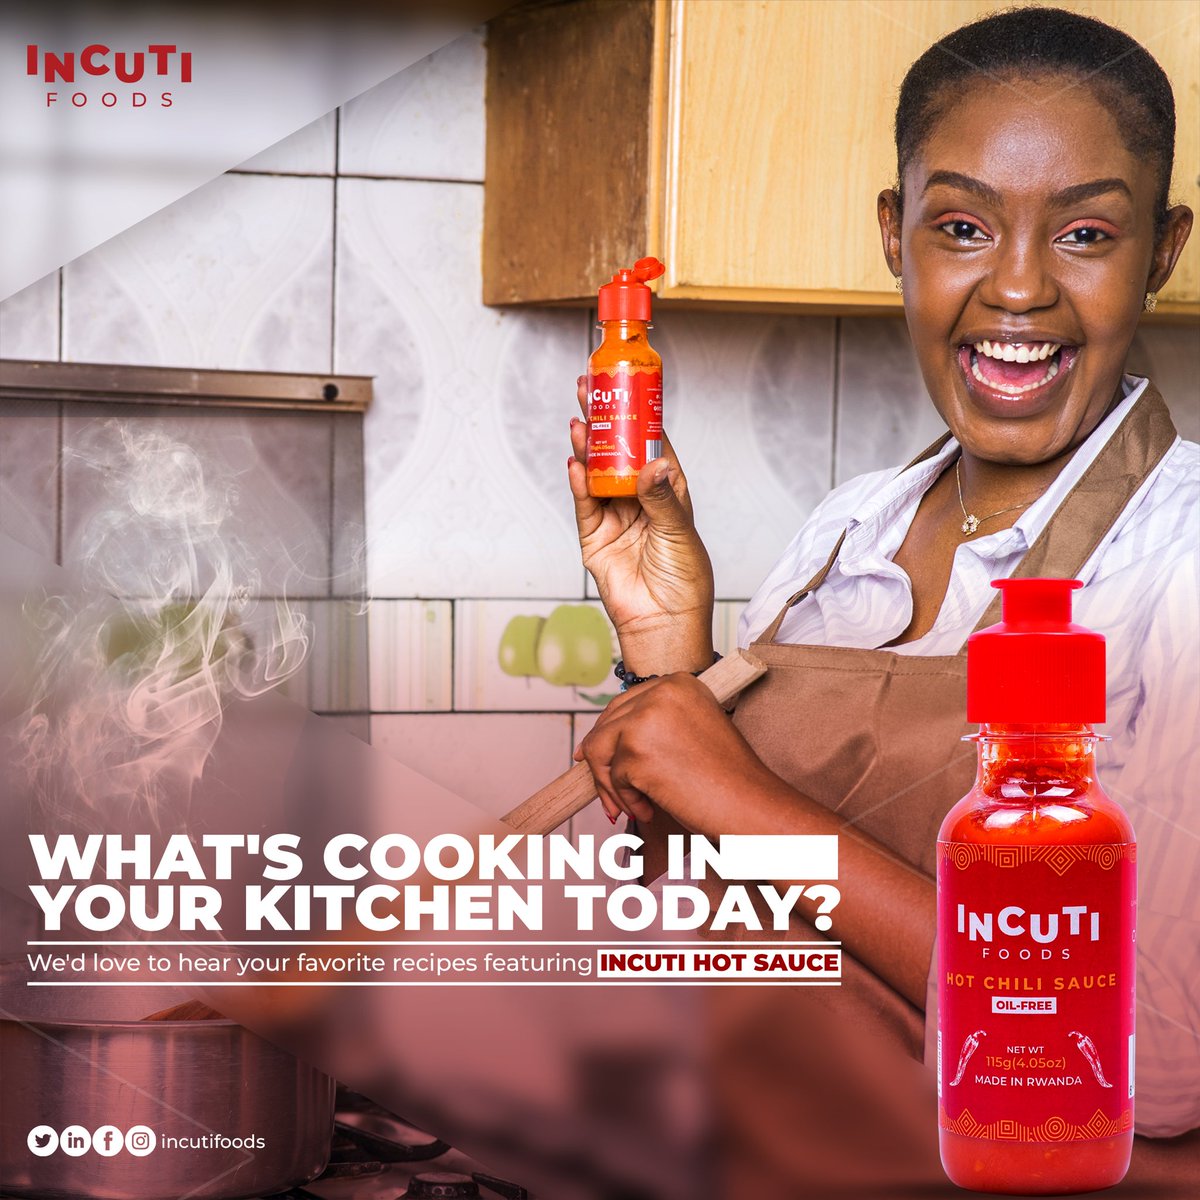 Incuti What's cooking in your kitchen today? 
We'd love to hear your favorite recipes featuring Incuti Foods Hot Sauce! 🔥 

Share them in the comments below. 

#incutifoods #madeinrwanda #chillisauce